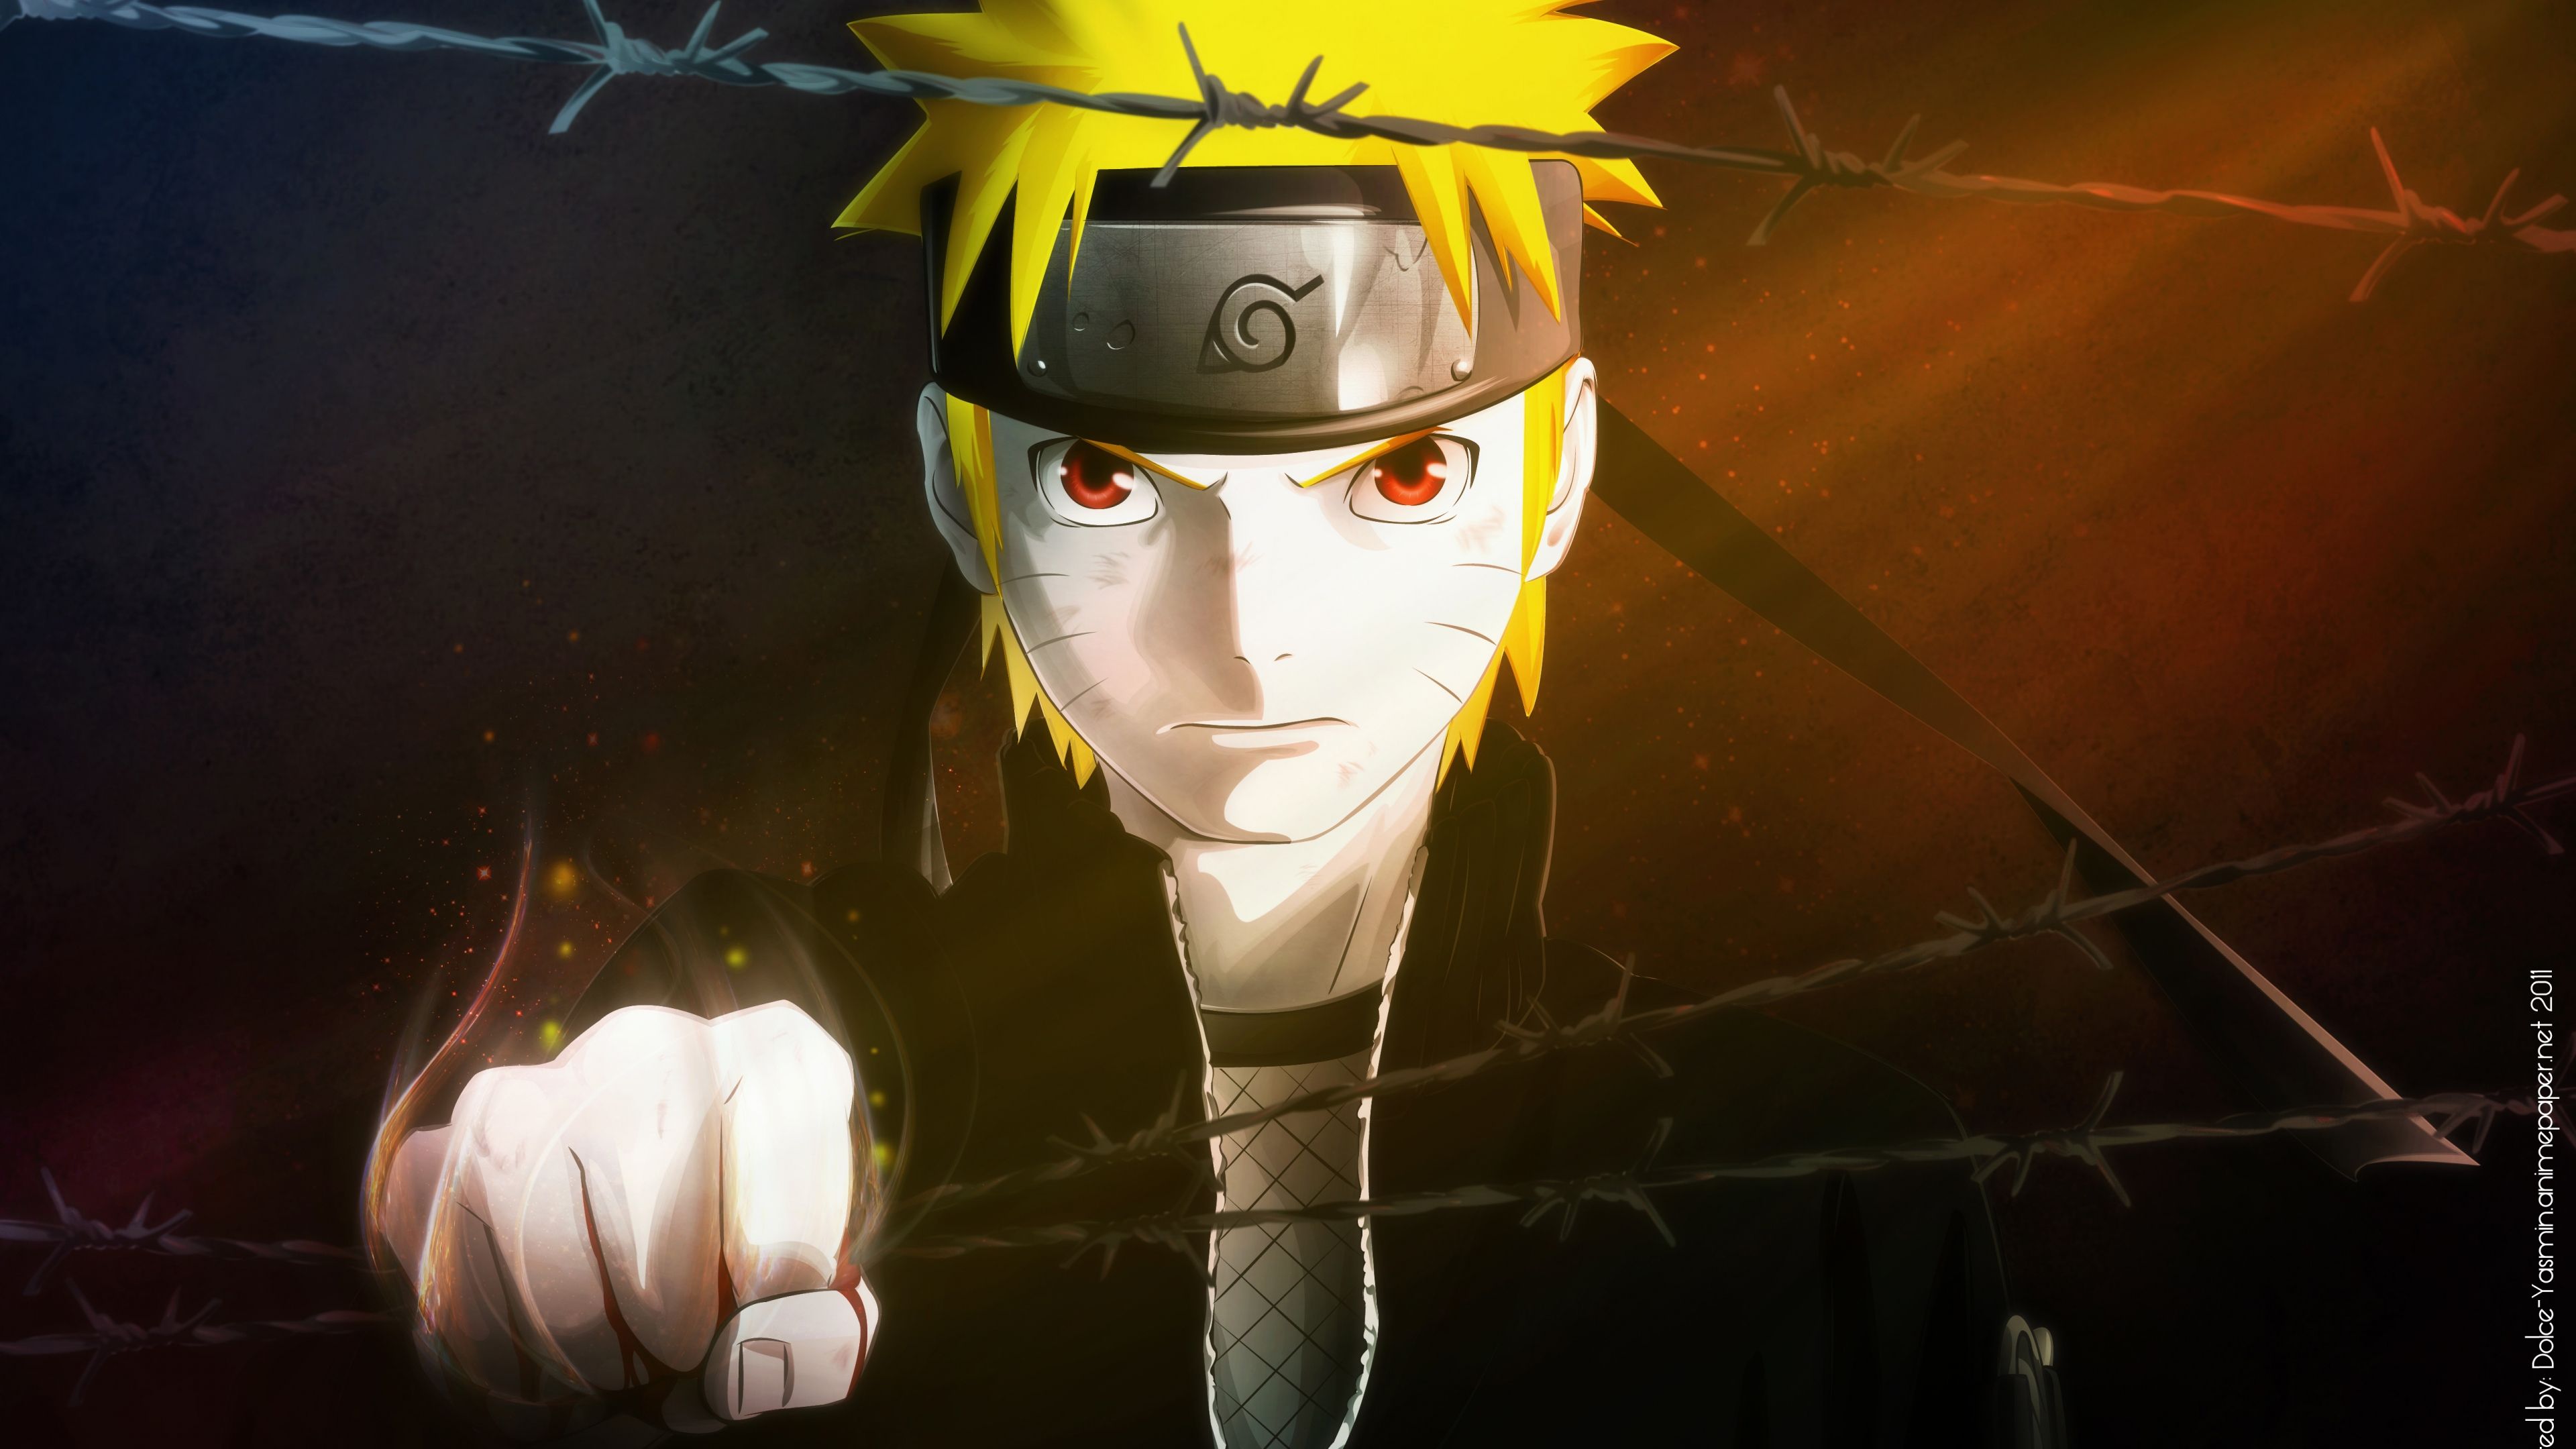 Cool Naruto Wallpapers K Cool Naruto Wallpapers Images Also